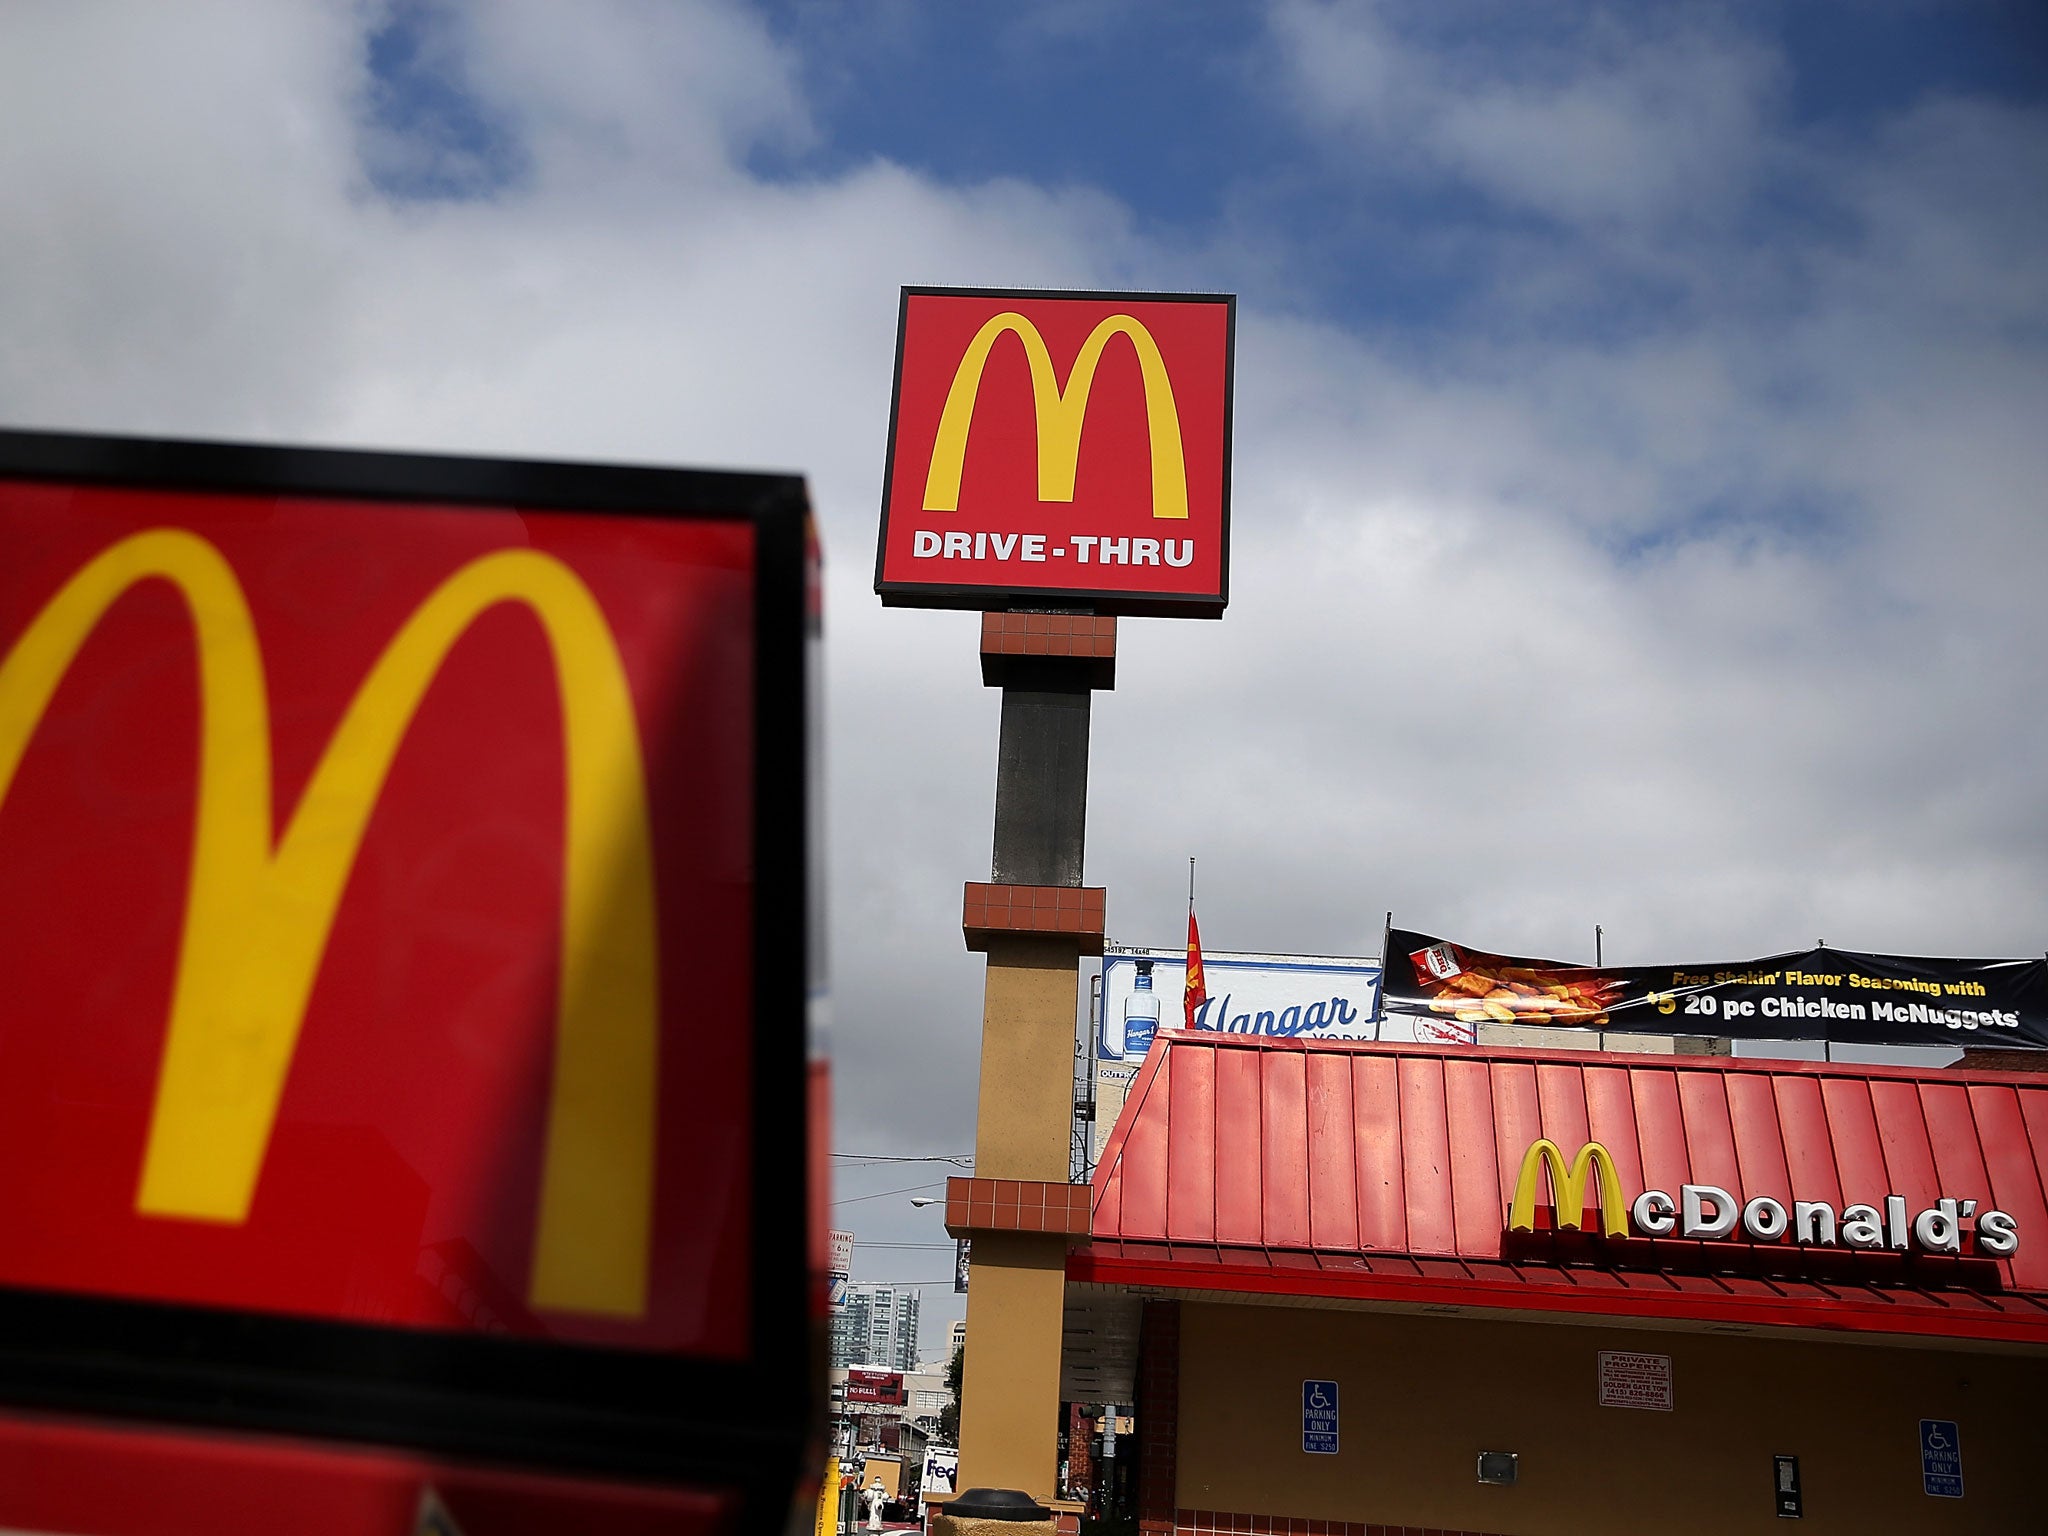 McDonald's has experimented with different formats and foods since Easterbrook took the helm